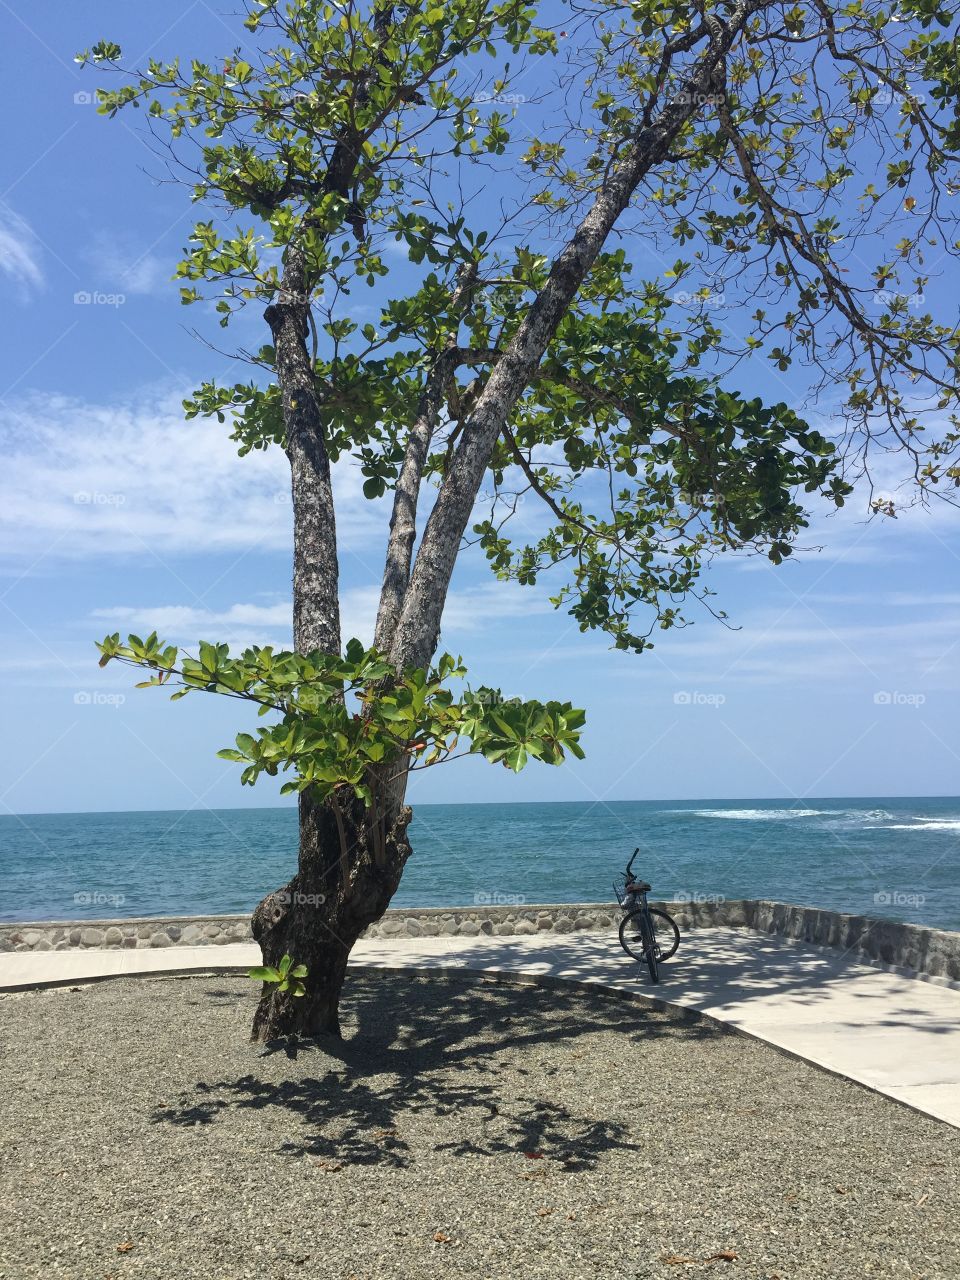 A shady spot under the shade of the green leaf tree to park your bicycle for a fantastic view of the clear calm blue water of the ocean 